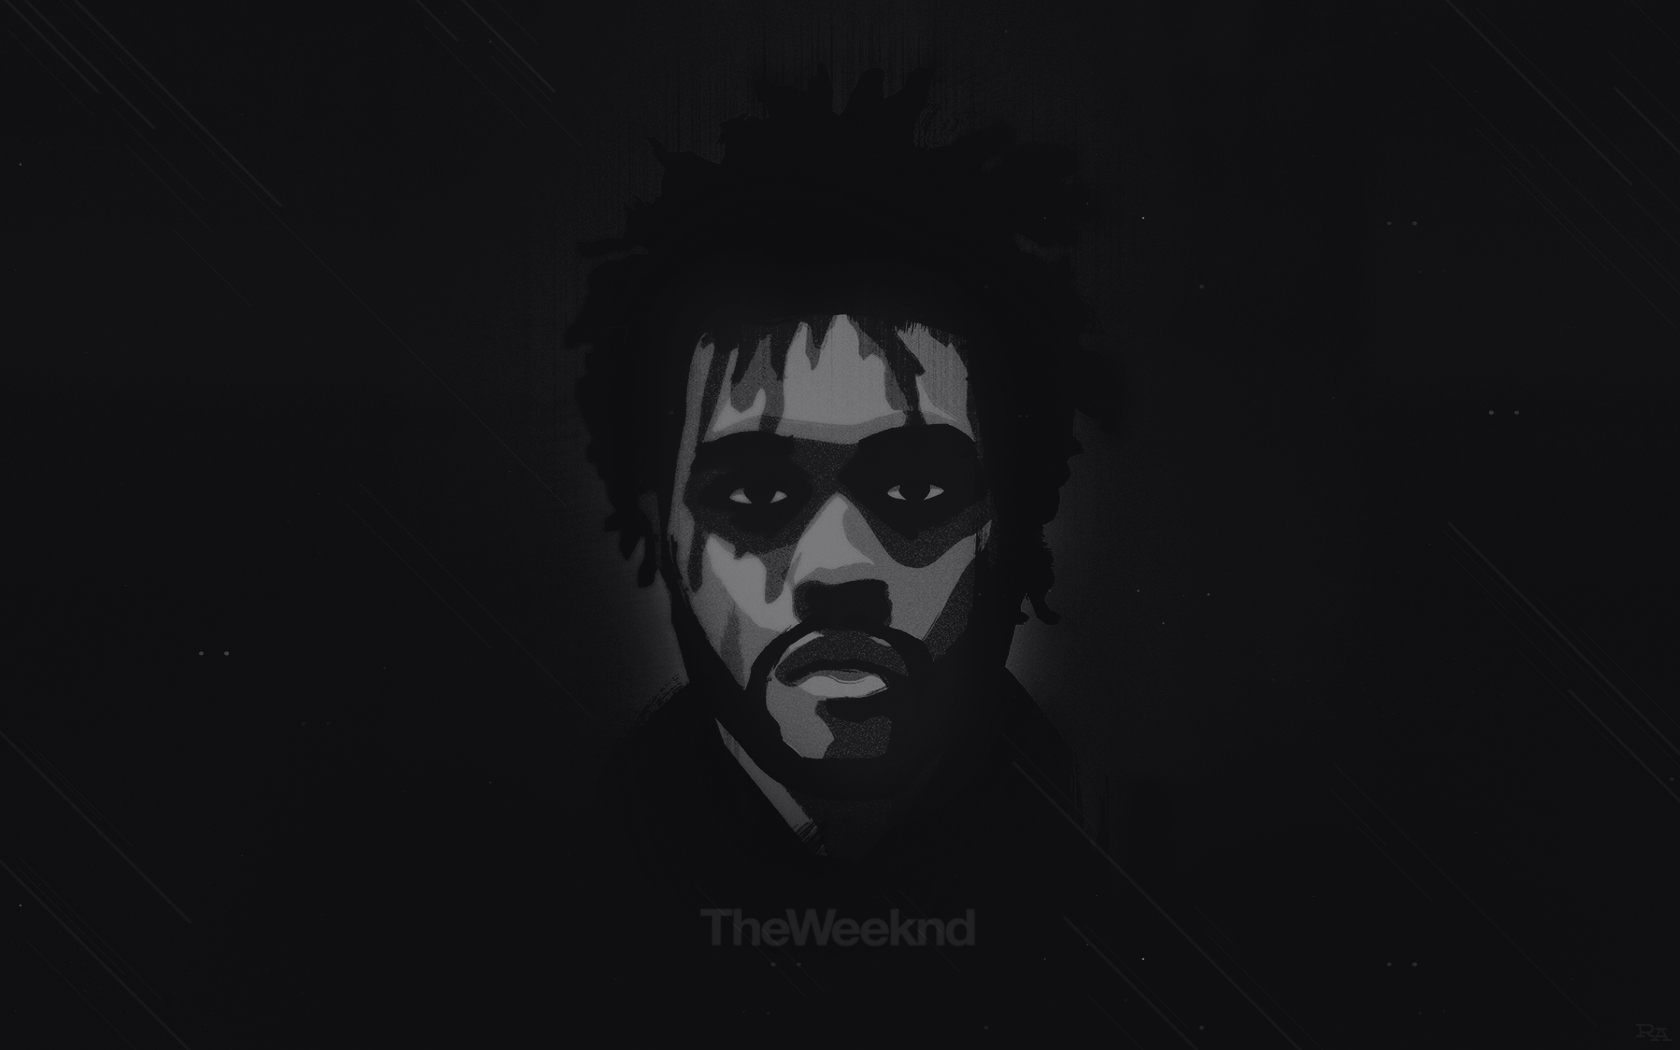 The Weeknd 8197 1680x1050 px